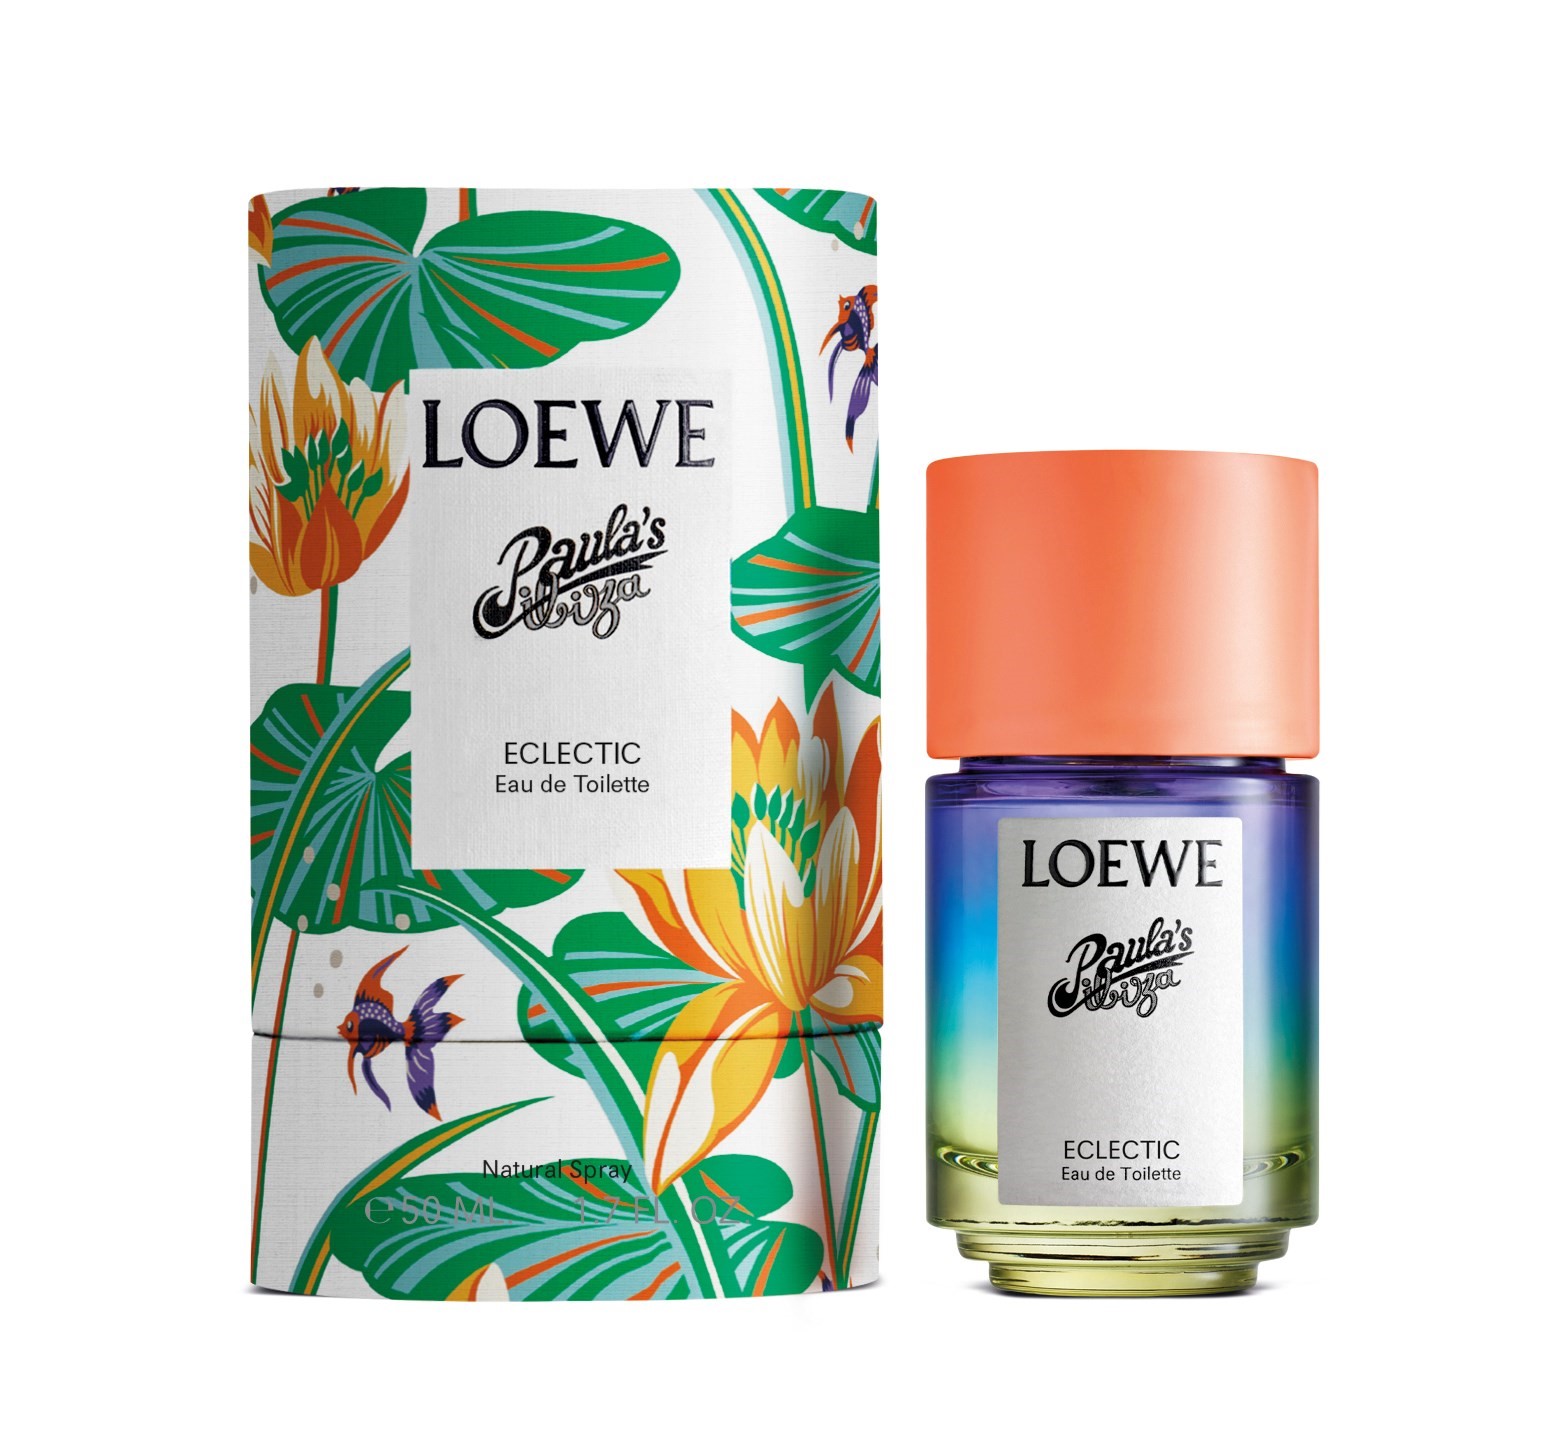 Loewe Paula's Ibiza Eclectic the Perfect Summer Scent | AnOther